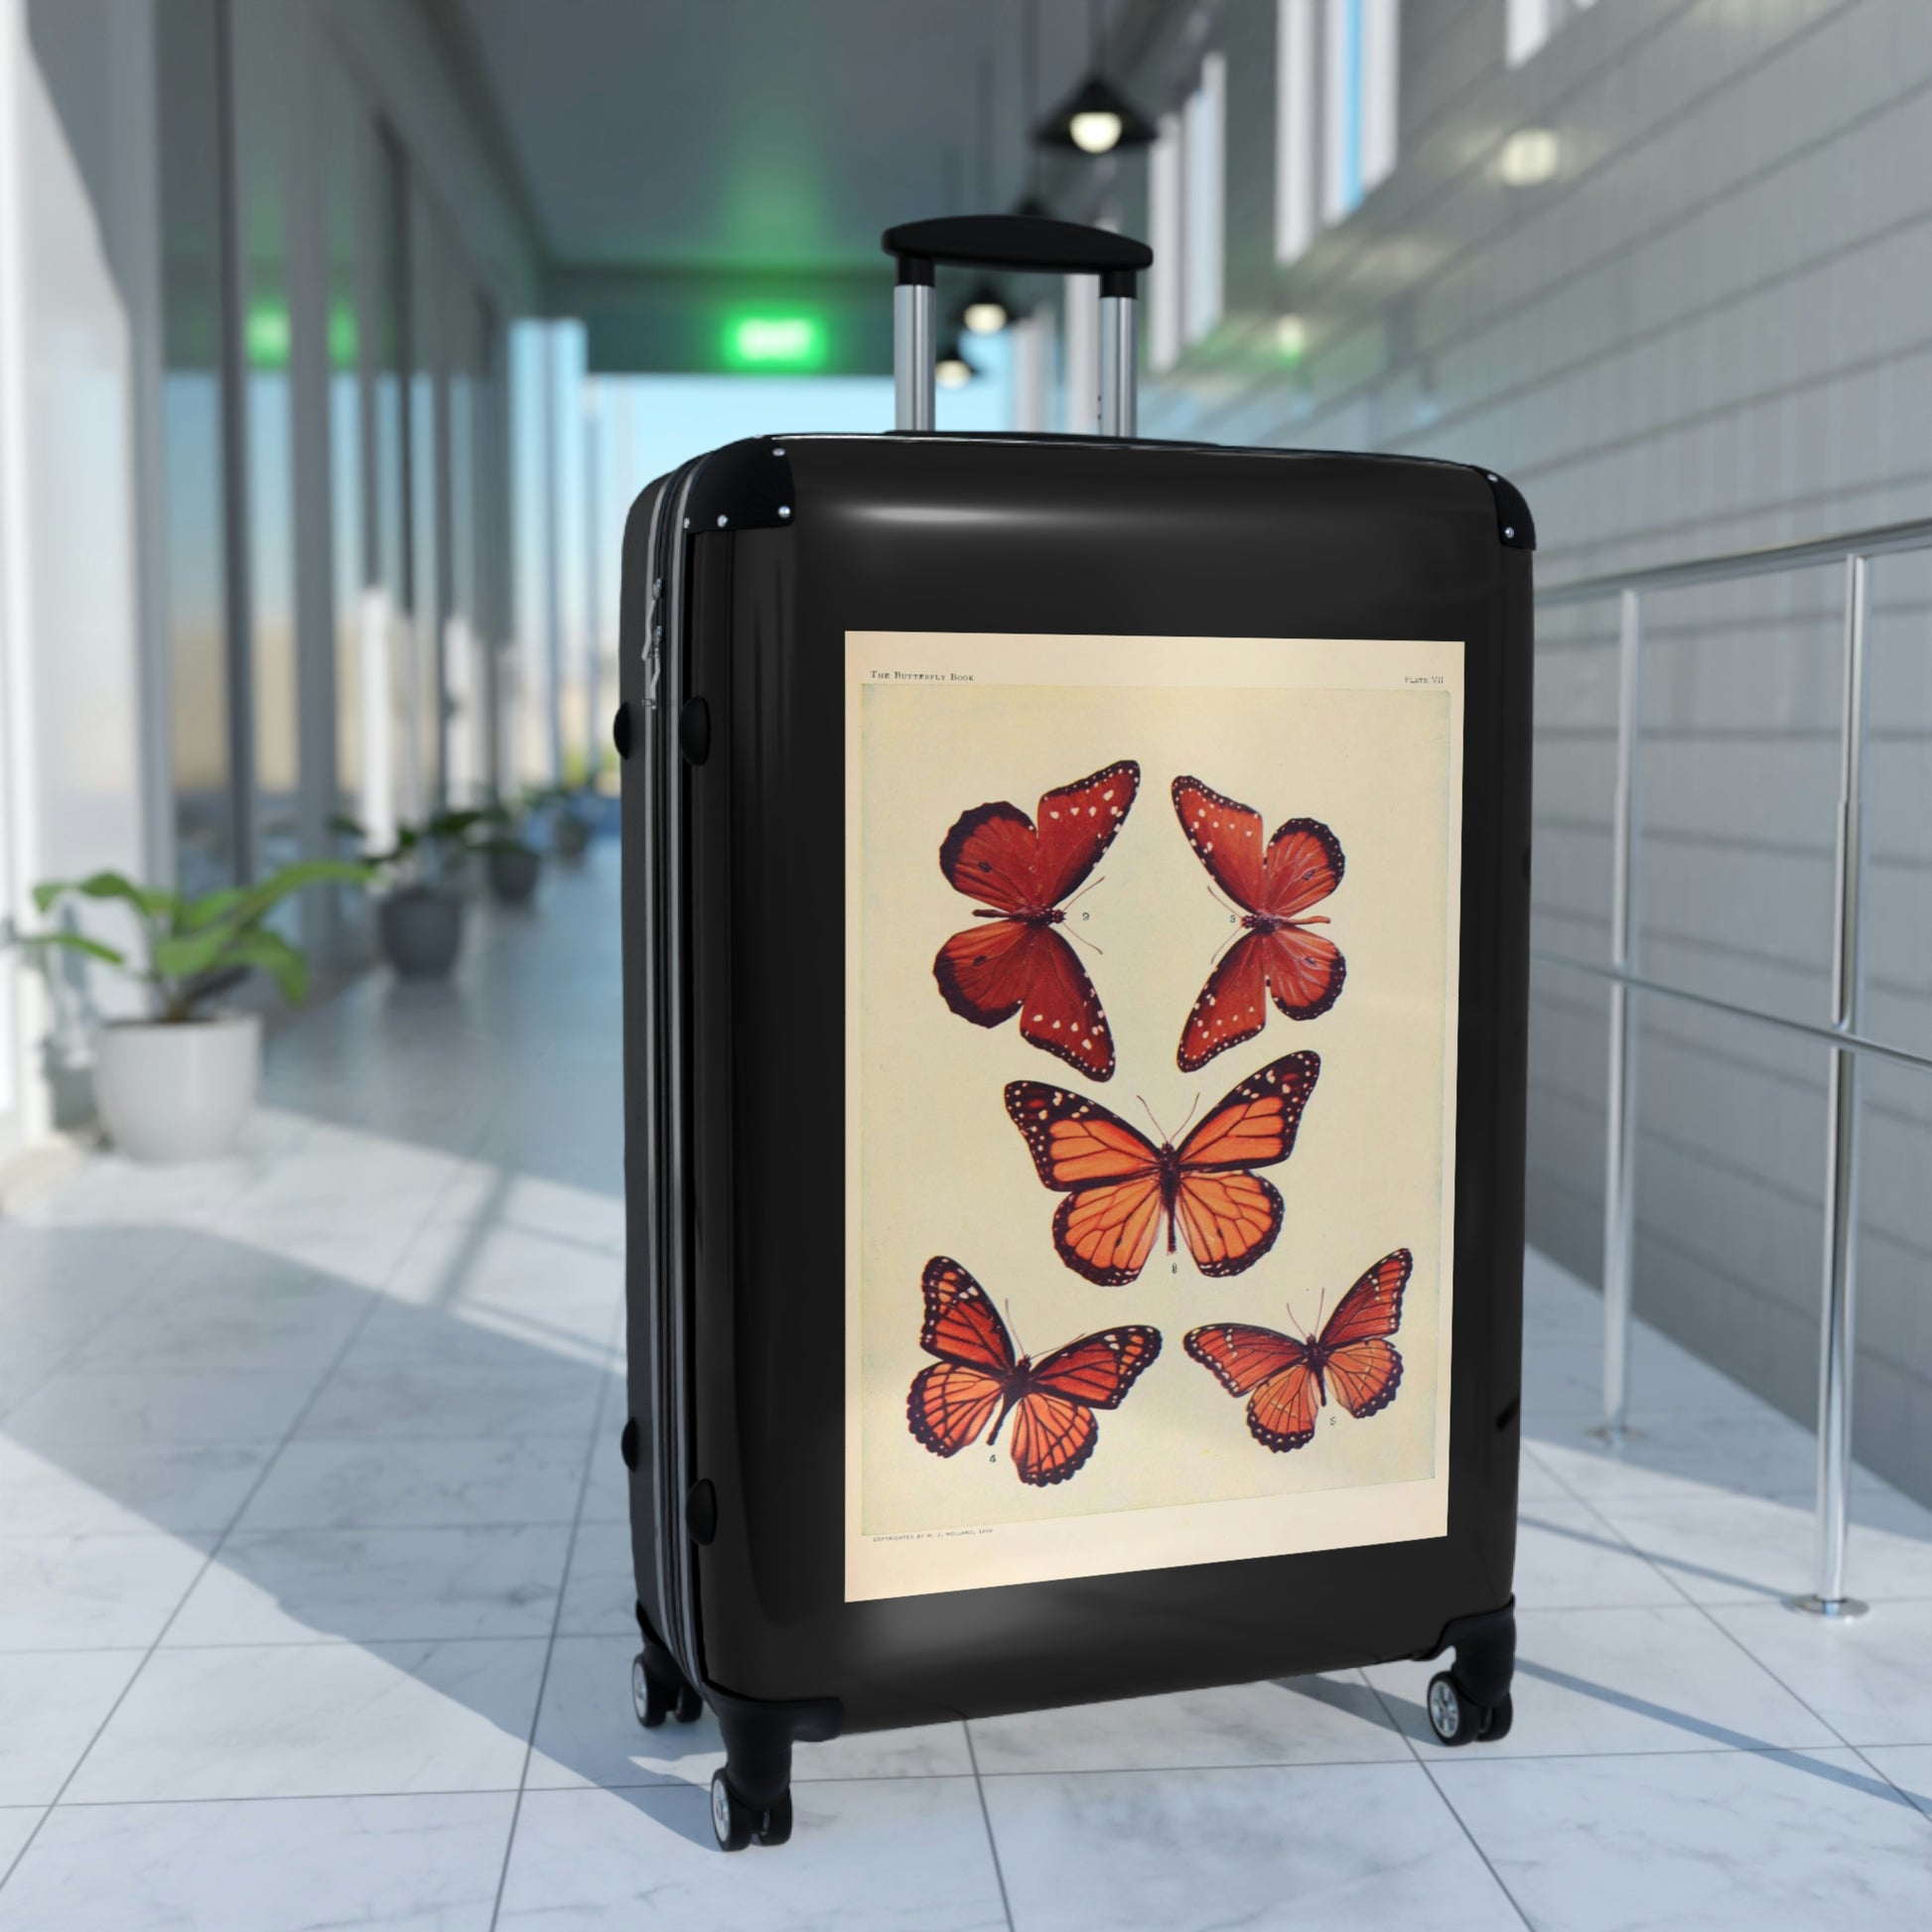 Getrott The Butterfly Book Butterflies Macrolepidopteran Rhopalocera Red Lepidoptera Black Cabin Suitcase Rolling Luggage Inner Pockets Extended Storage Adjustable Telescopic Handle Inner Pockets Double wheeled Polycarbonate Hard-shell Built-in Lock